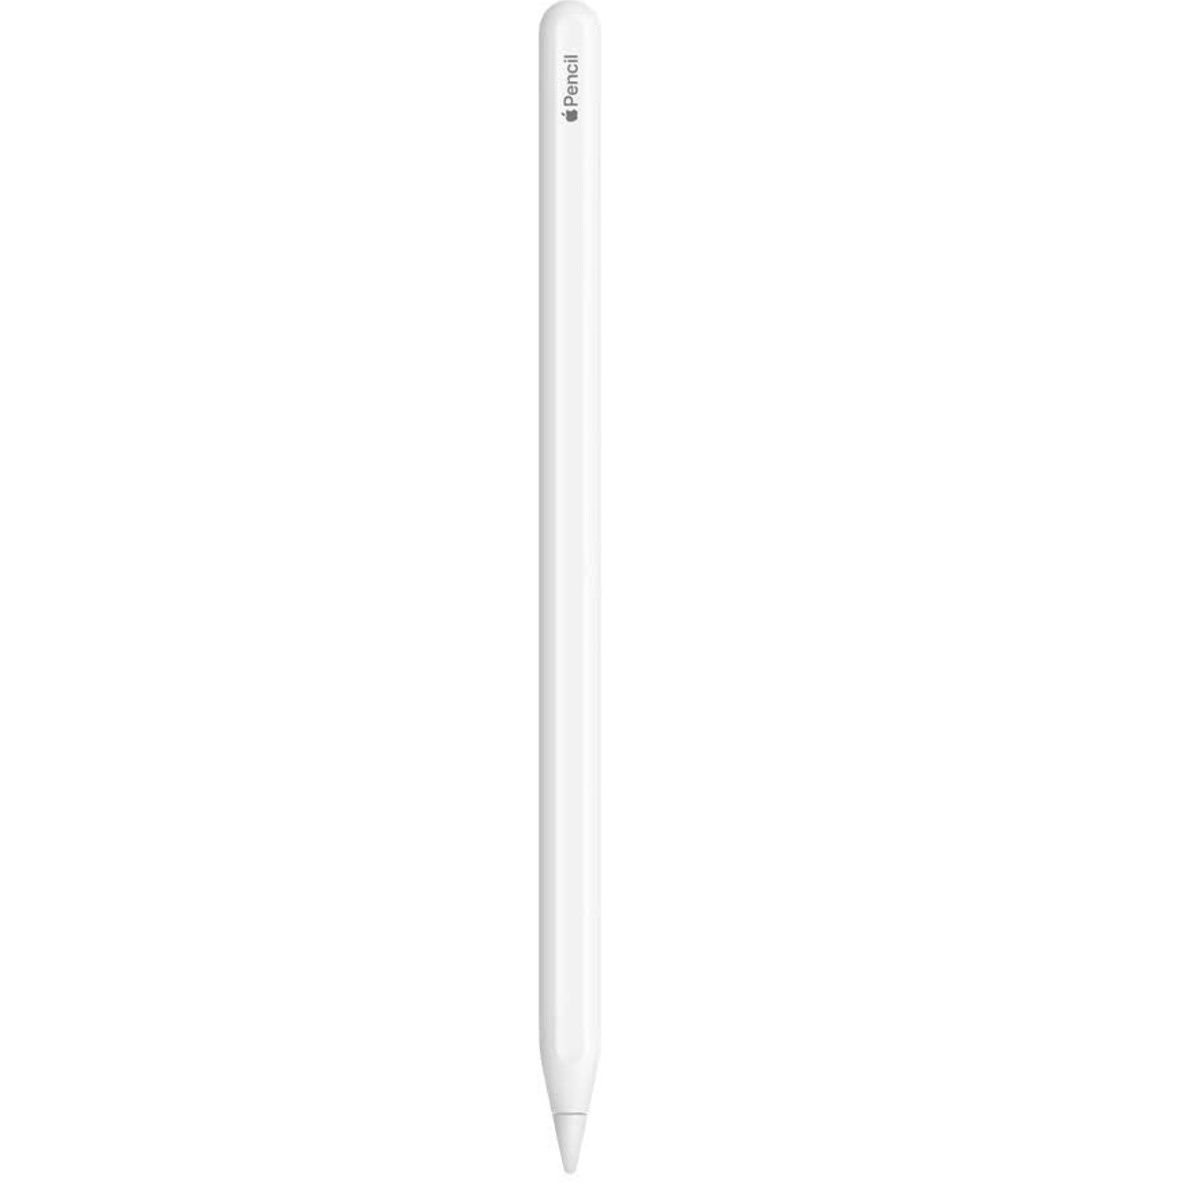 The Apple Pencil 2 pairs to compatible iPads magnetically and charges wirelessly through the same mechanism.